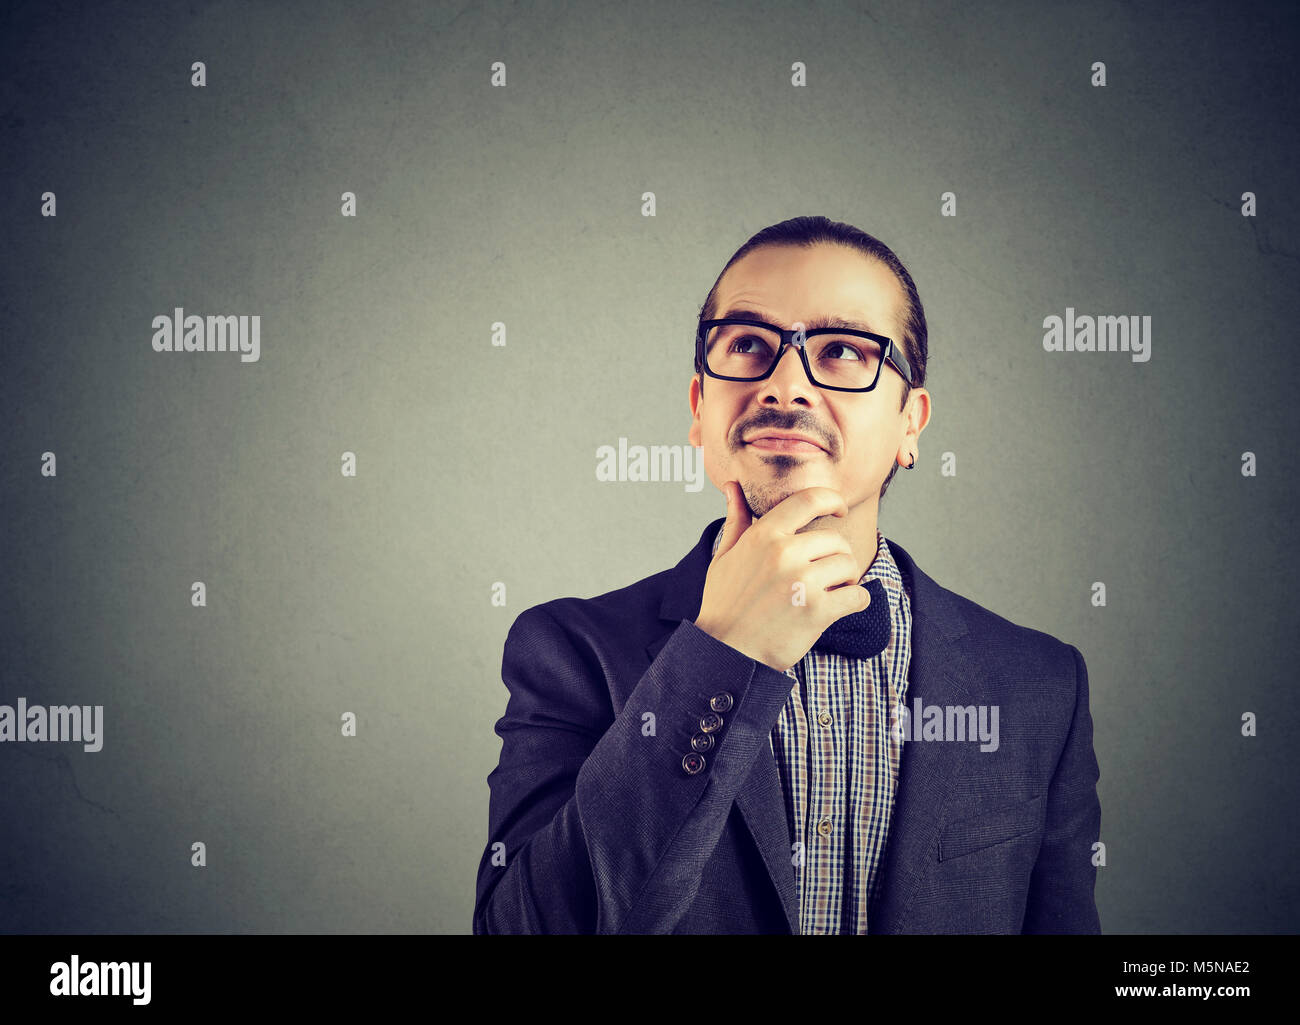 Young happy man in suit and glasses rubbing chin and daydreaming looking away on gray. Stock Photo